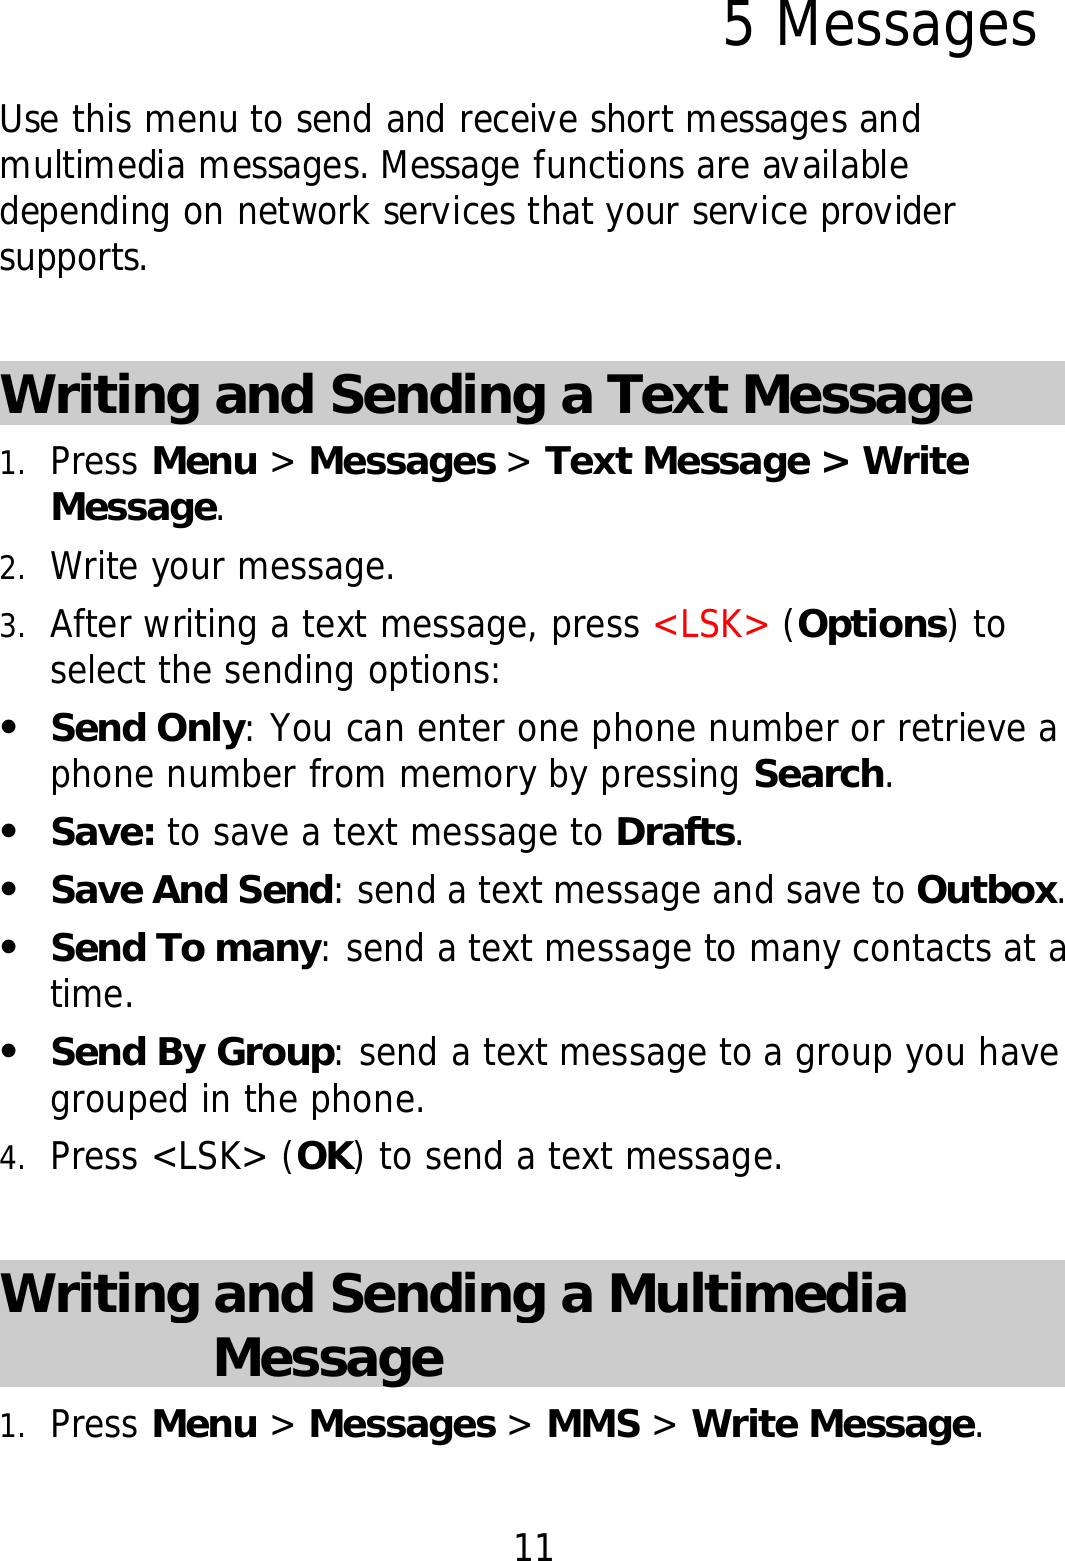 11 5 Messages Use this menu to send and receive short messages and multimedia messages. Message functions are available depending on network services that your service provider supports.  Writing and Sending a Text Message   1. Press Menu &gt; Messages &gt; Text Message &gt; Write Message. 2. Write your message. 3. After writing a text message, press &lt;LSK&gt; (Options) to select the sending options: z Send Only: You can enter one phone number or retrieve a phone number from memory by pressing Search. z Save: to save a text message to Drafts. z Save And Send: send a text message and save to Outbox. z Send To many: send a text message to many contacts at a time. z Send By Group: send a text message to a group you have grouped in the phone. 4. Press &lt;LSK&gt; (OK) to send a text message.  Writing and Sending a Multimedia Message 1. Press Menu &gt; Messages &gt; MMS &gt; Write Message. 